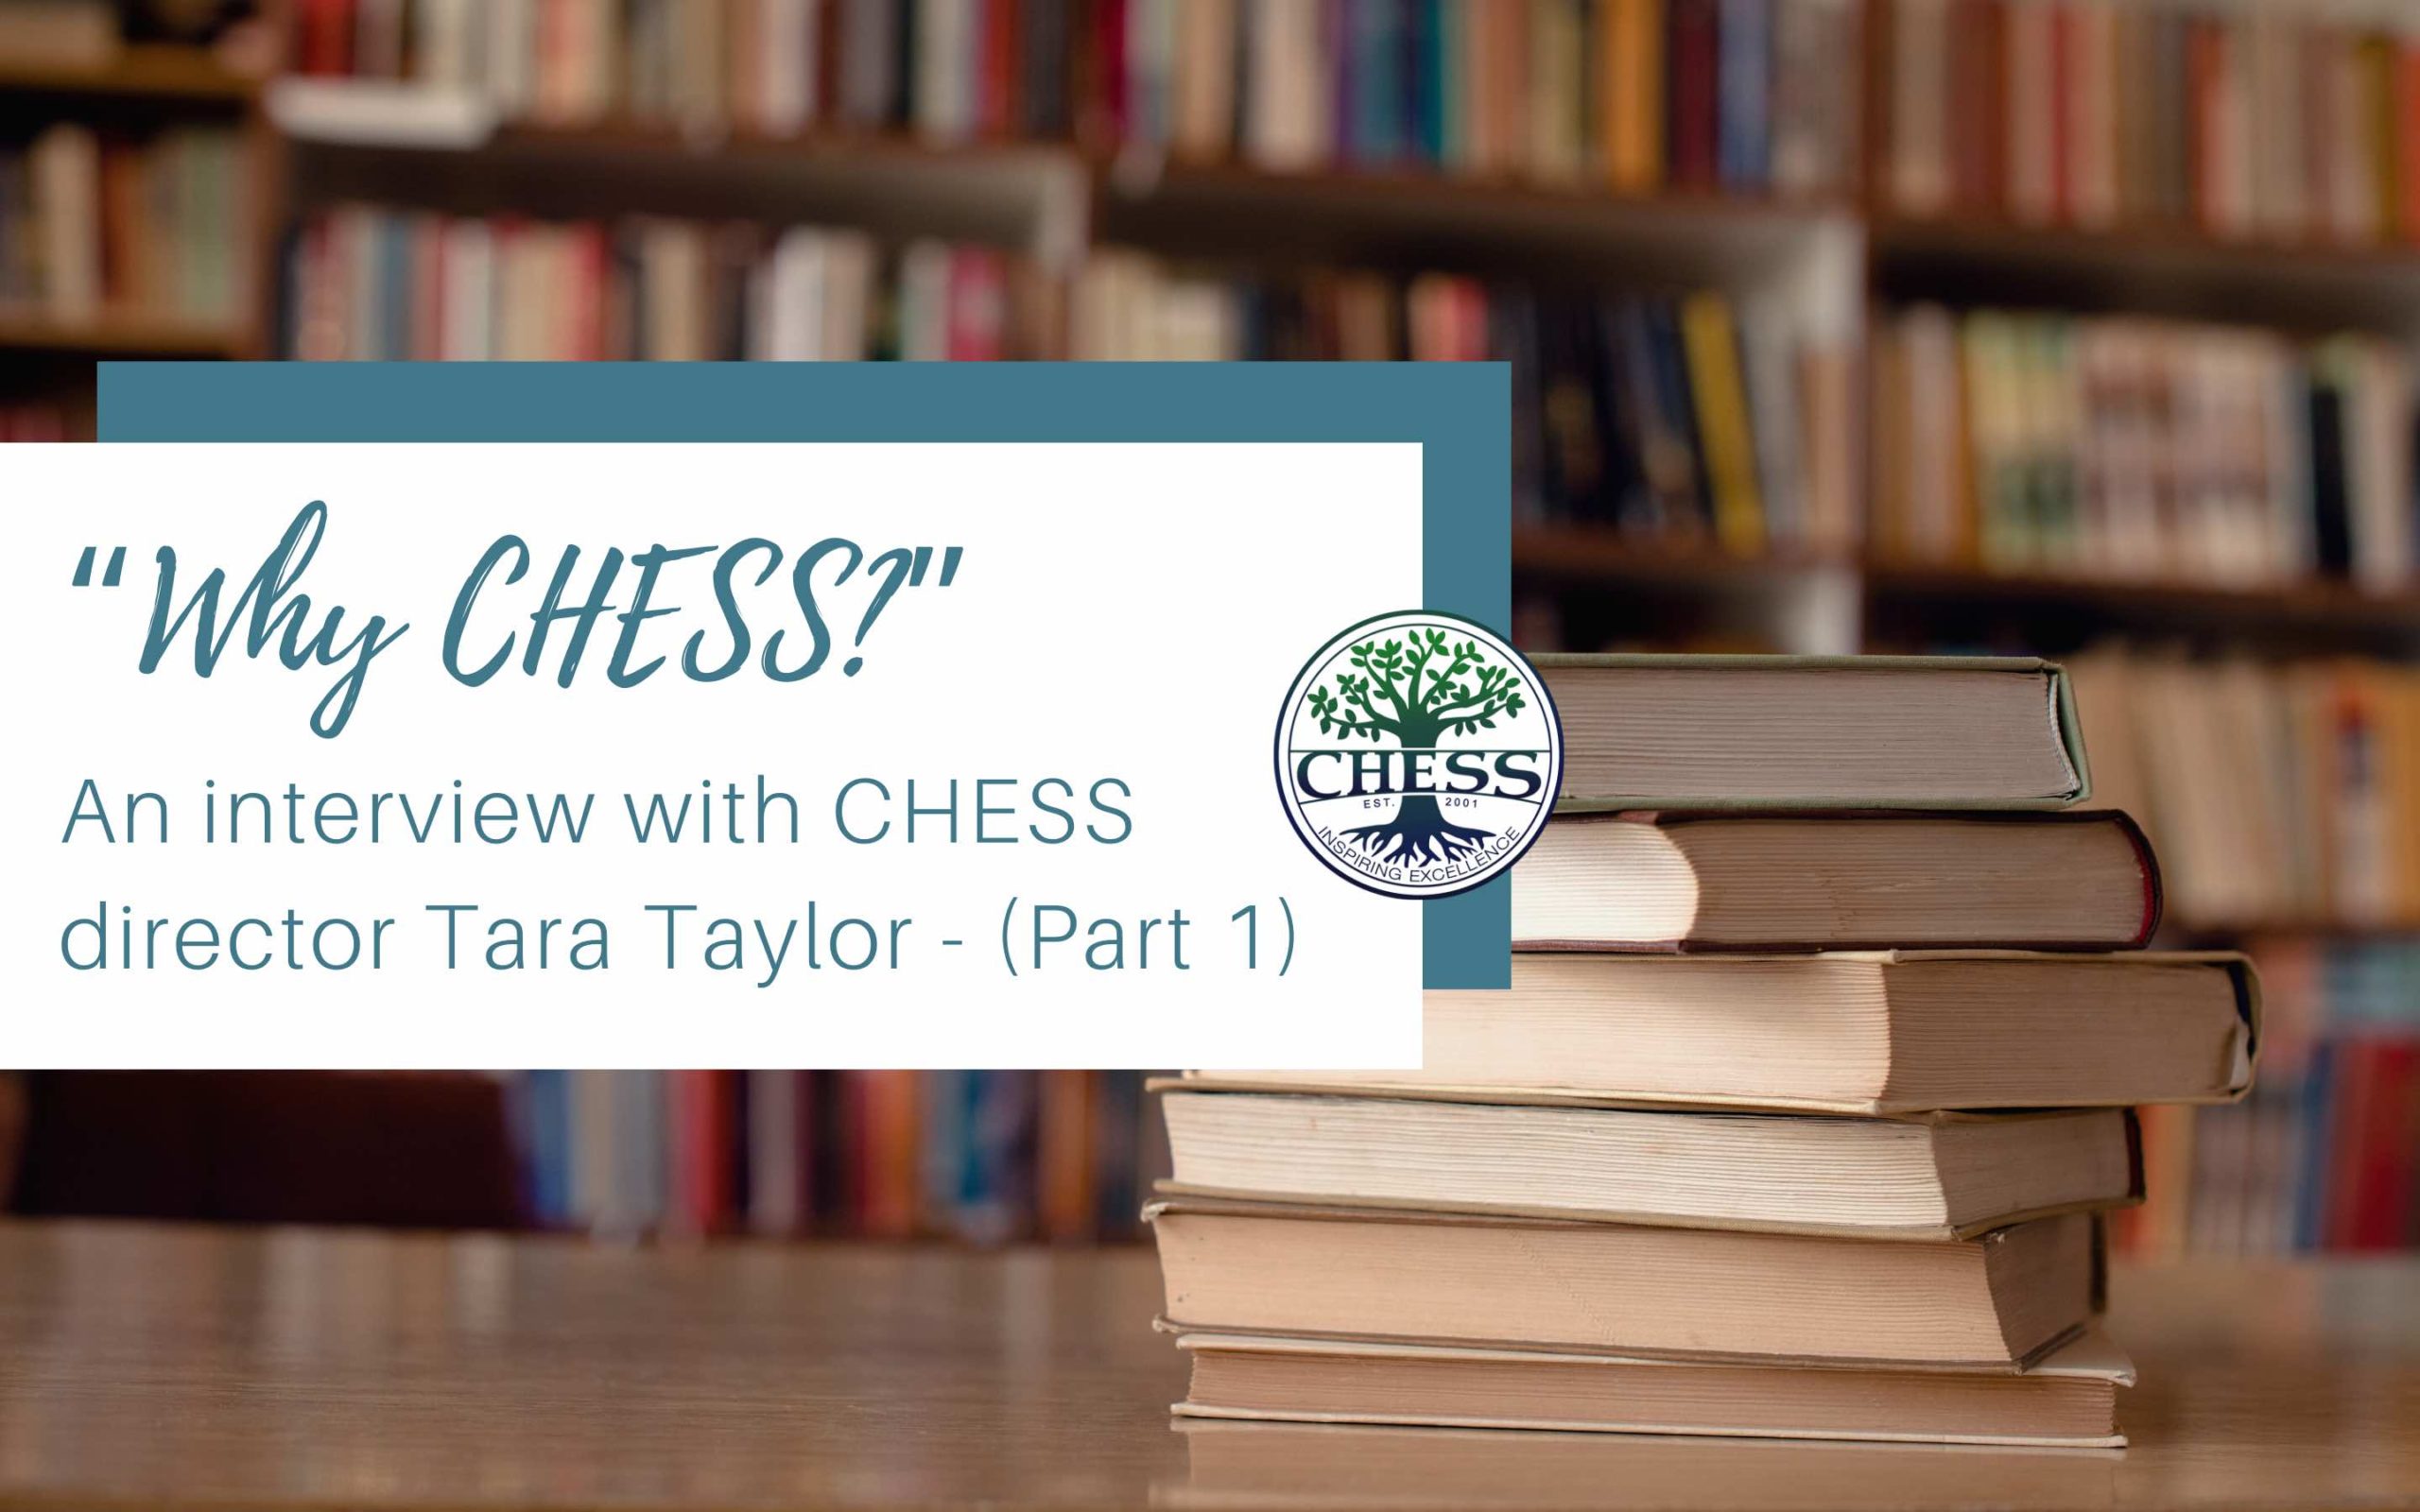 “Why CHESS?”—An interview with CHESS director Tara Taylor (Part 1)